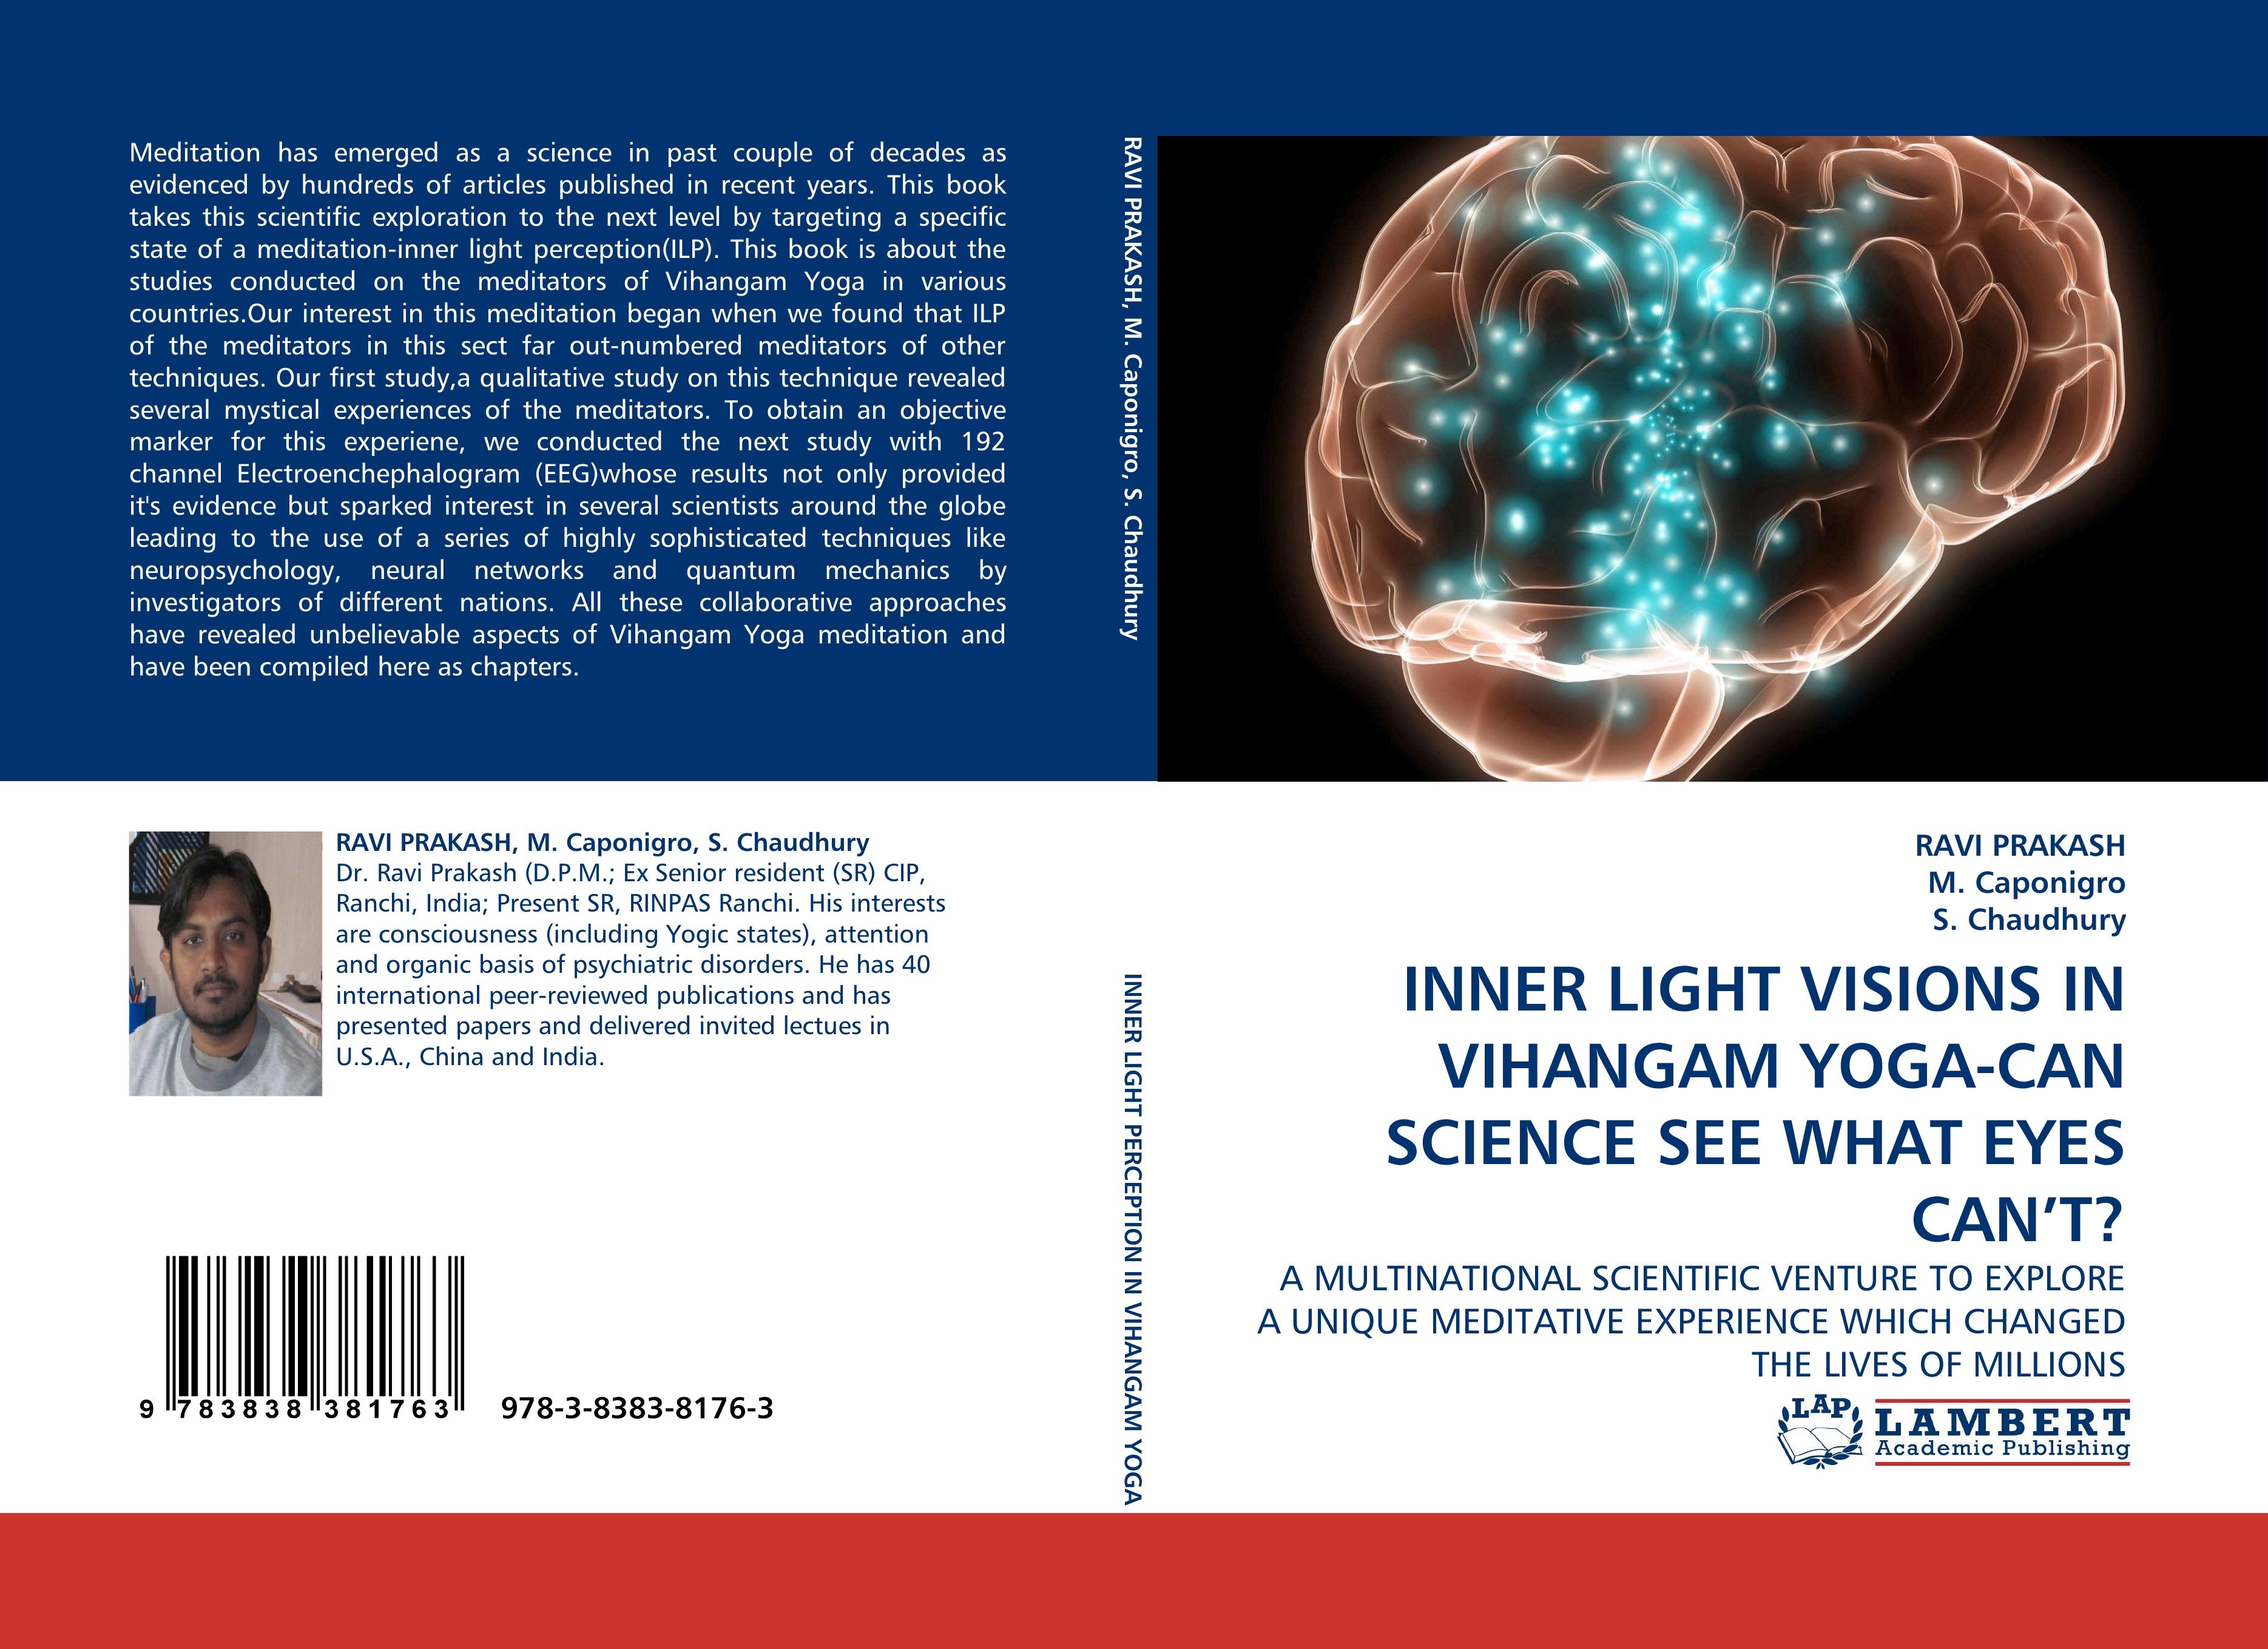 INNER LIGHT VISIONS IN VIHANGAM YOGA-CAN SCIENCE SEE WHAT EYES CAN T? - Ravi Prakash|M. Caponigro|S. Chaudhury